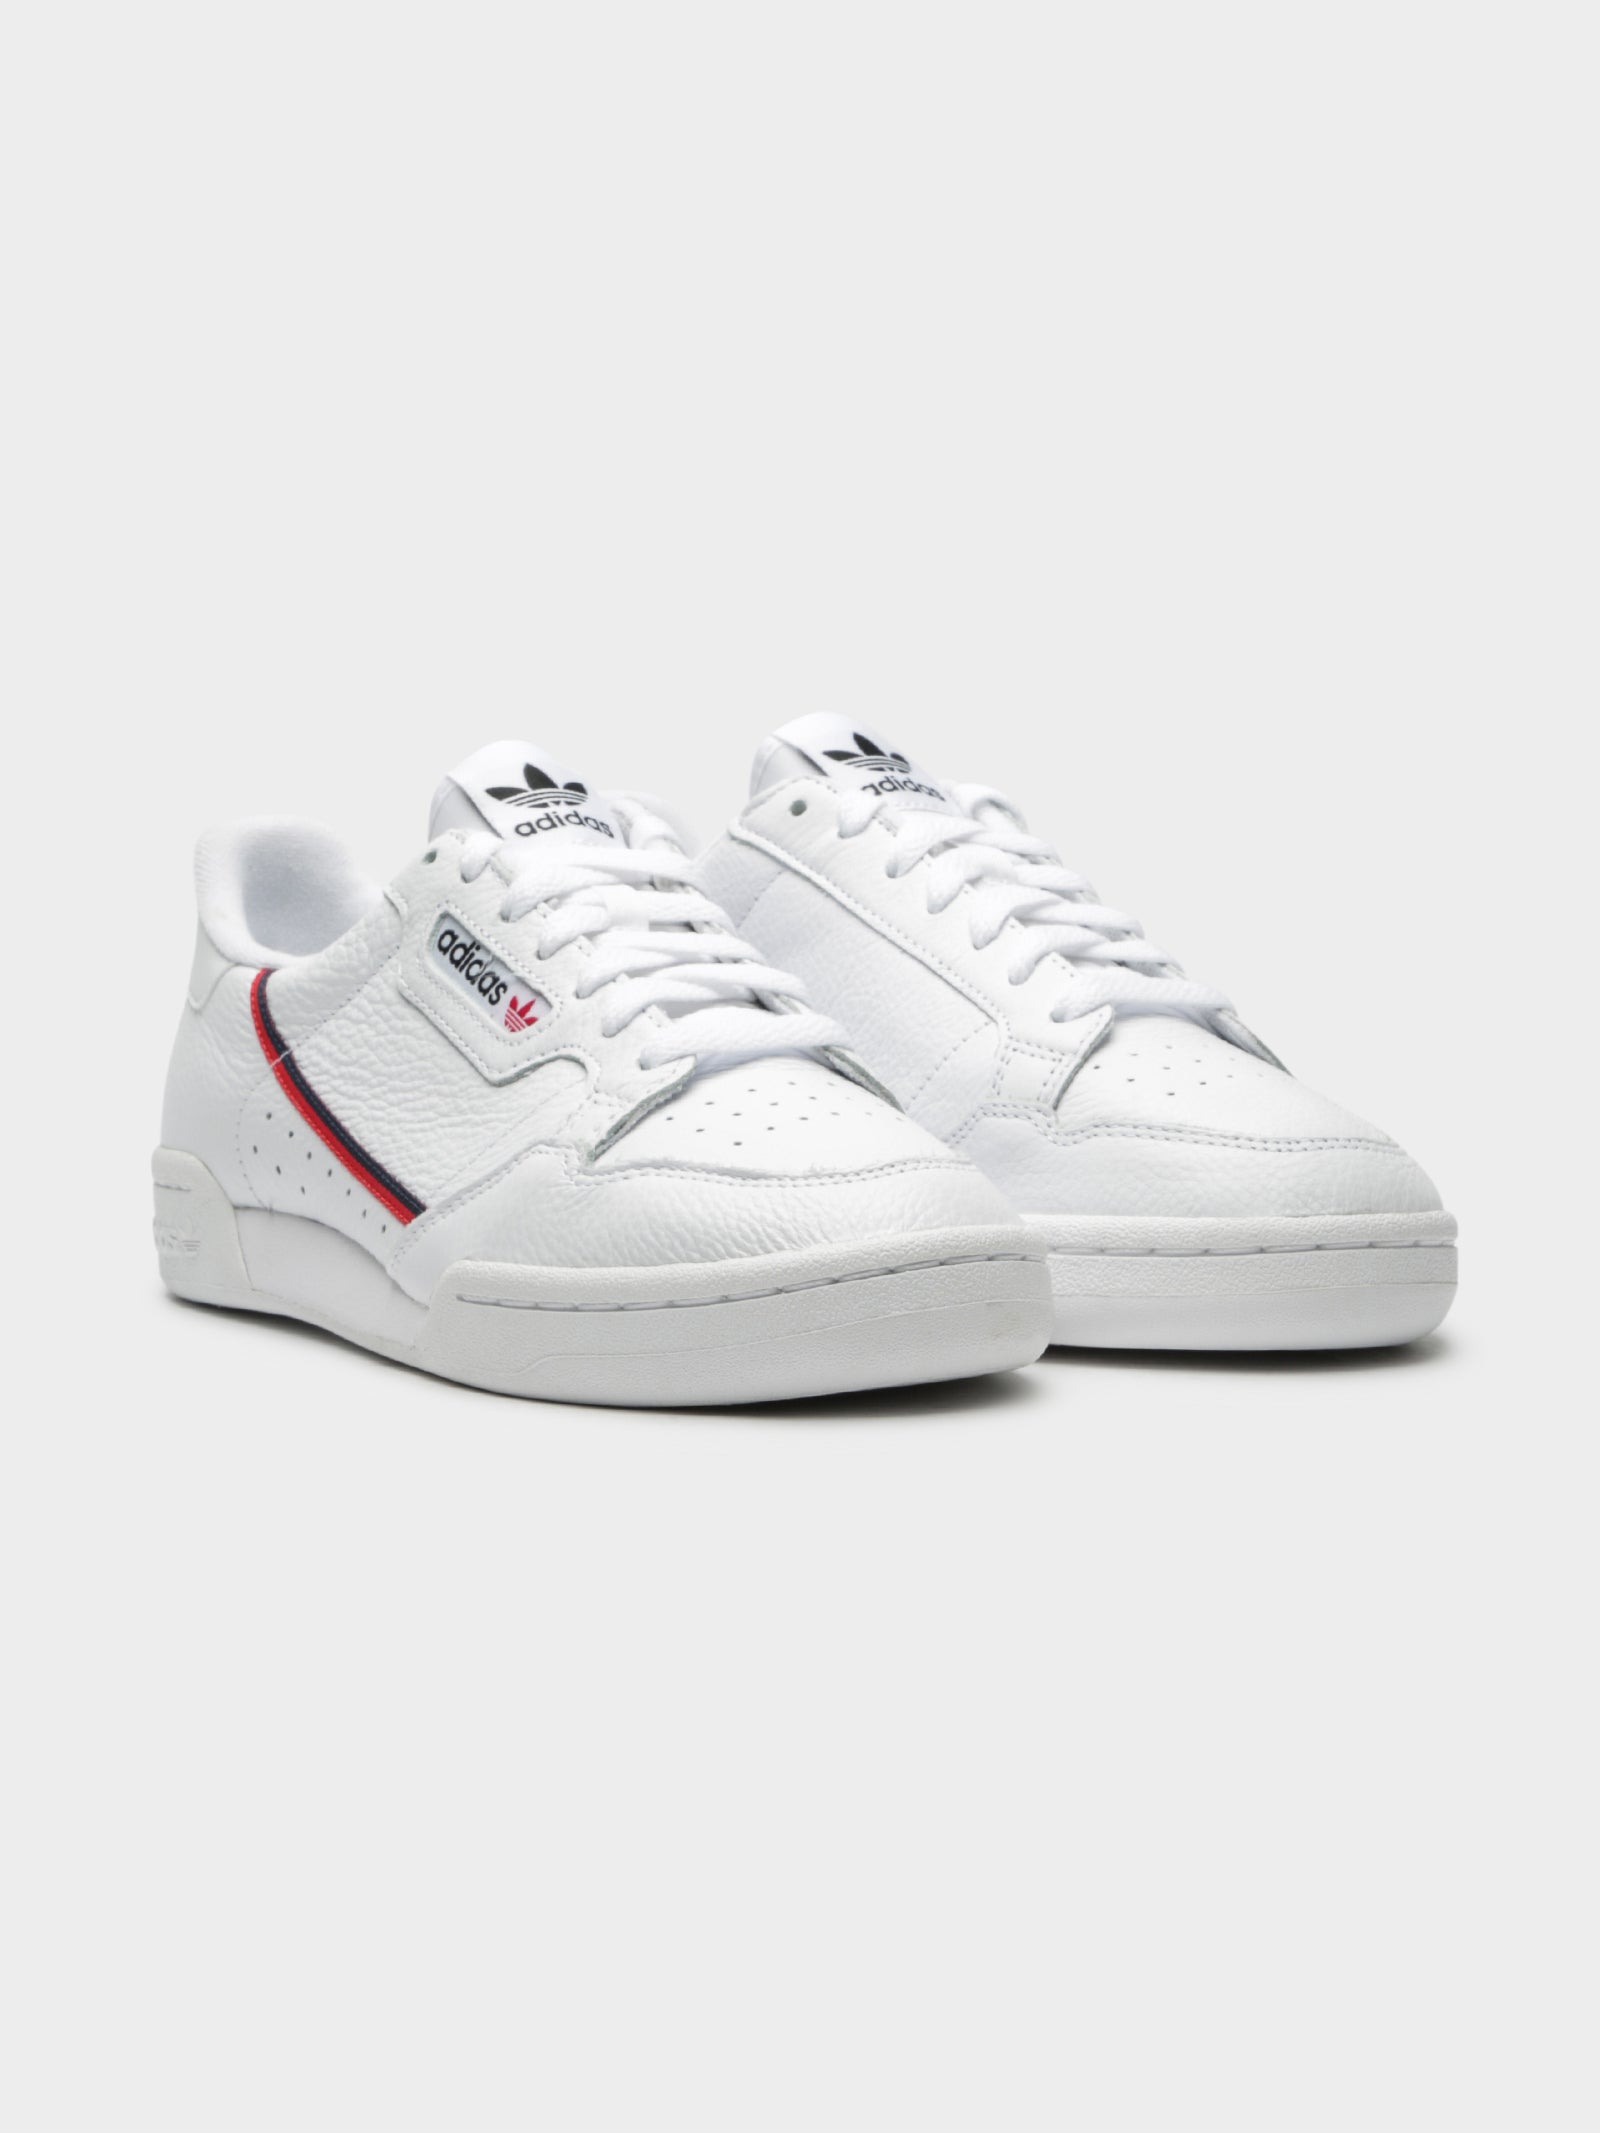 Unisex Continental 80 Sneakers in White